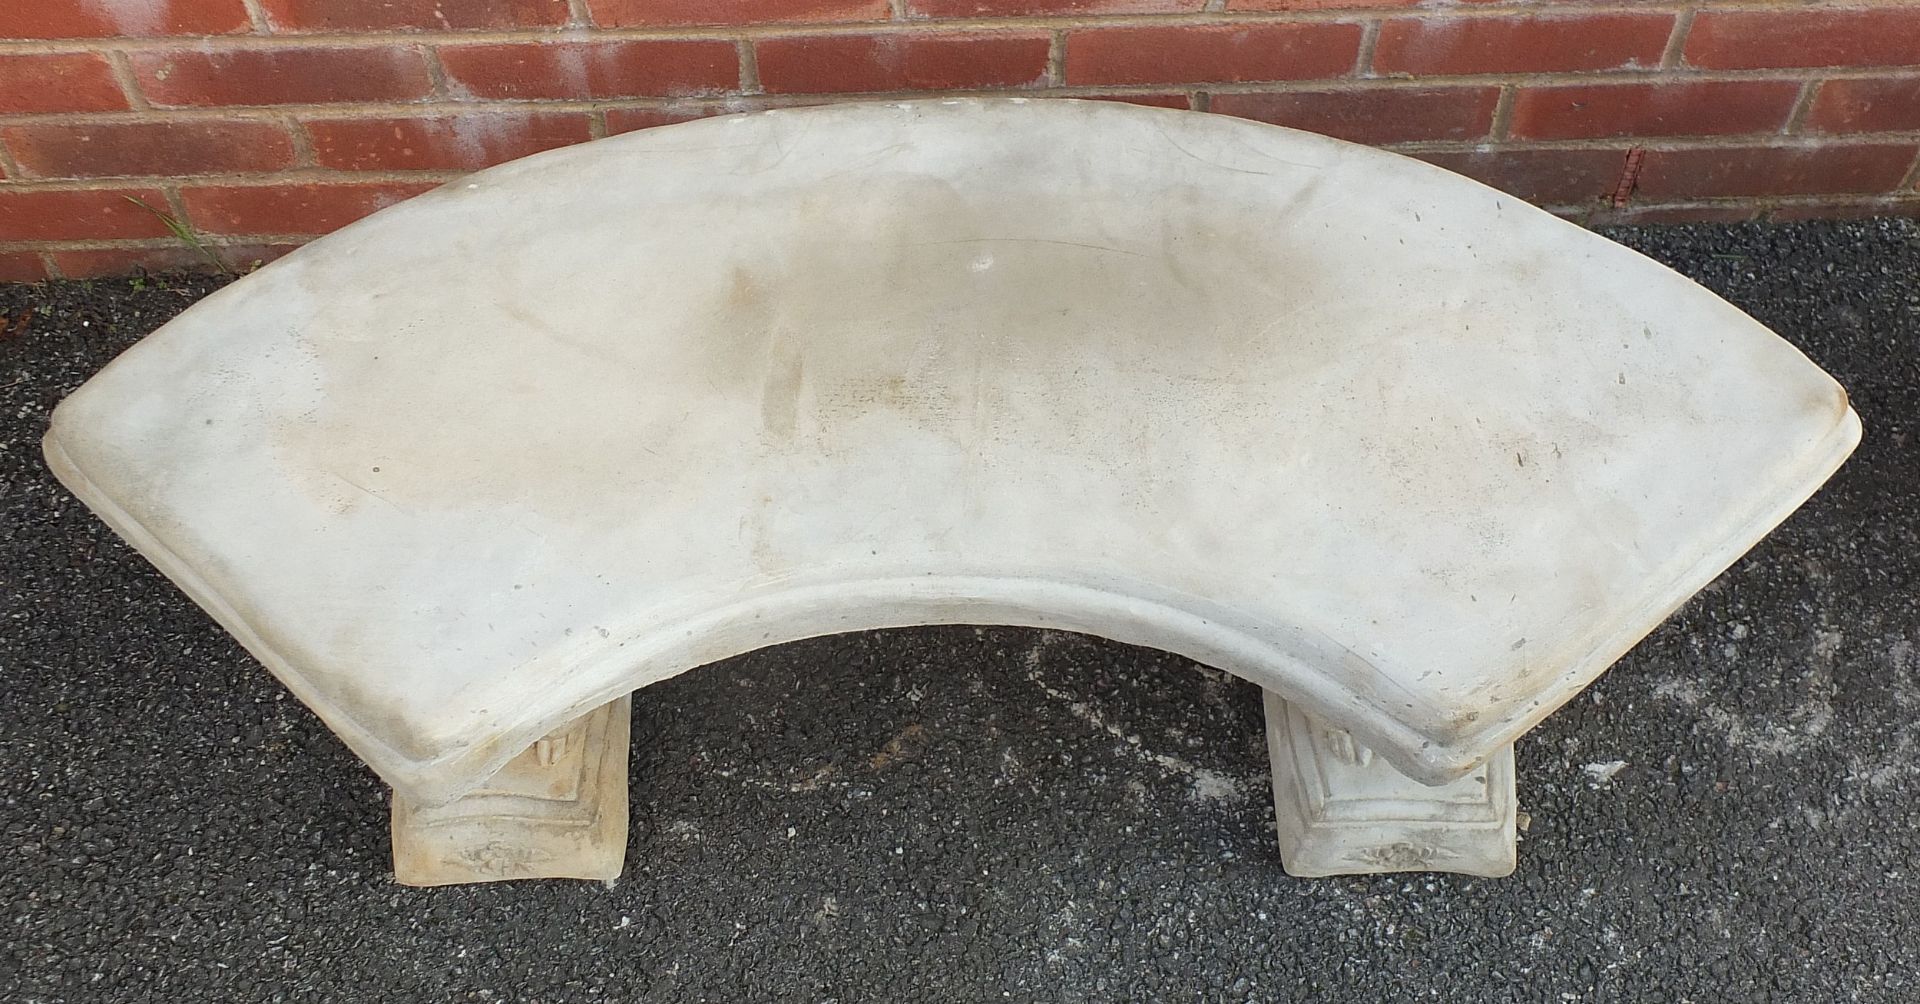 Stoneware garden bench with squirrel supports, 43cm high x 103cm wide - Image 2 of 3